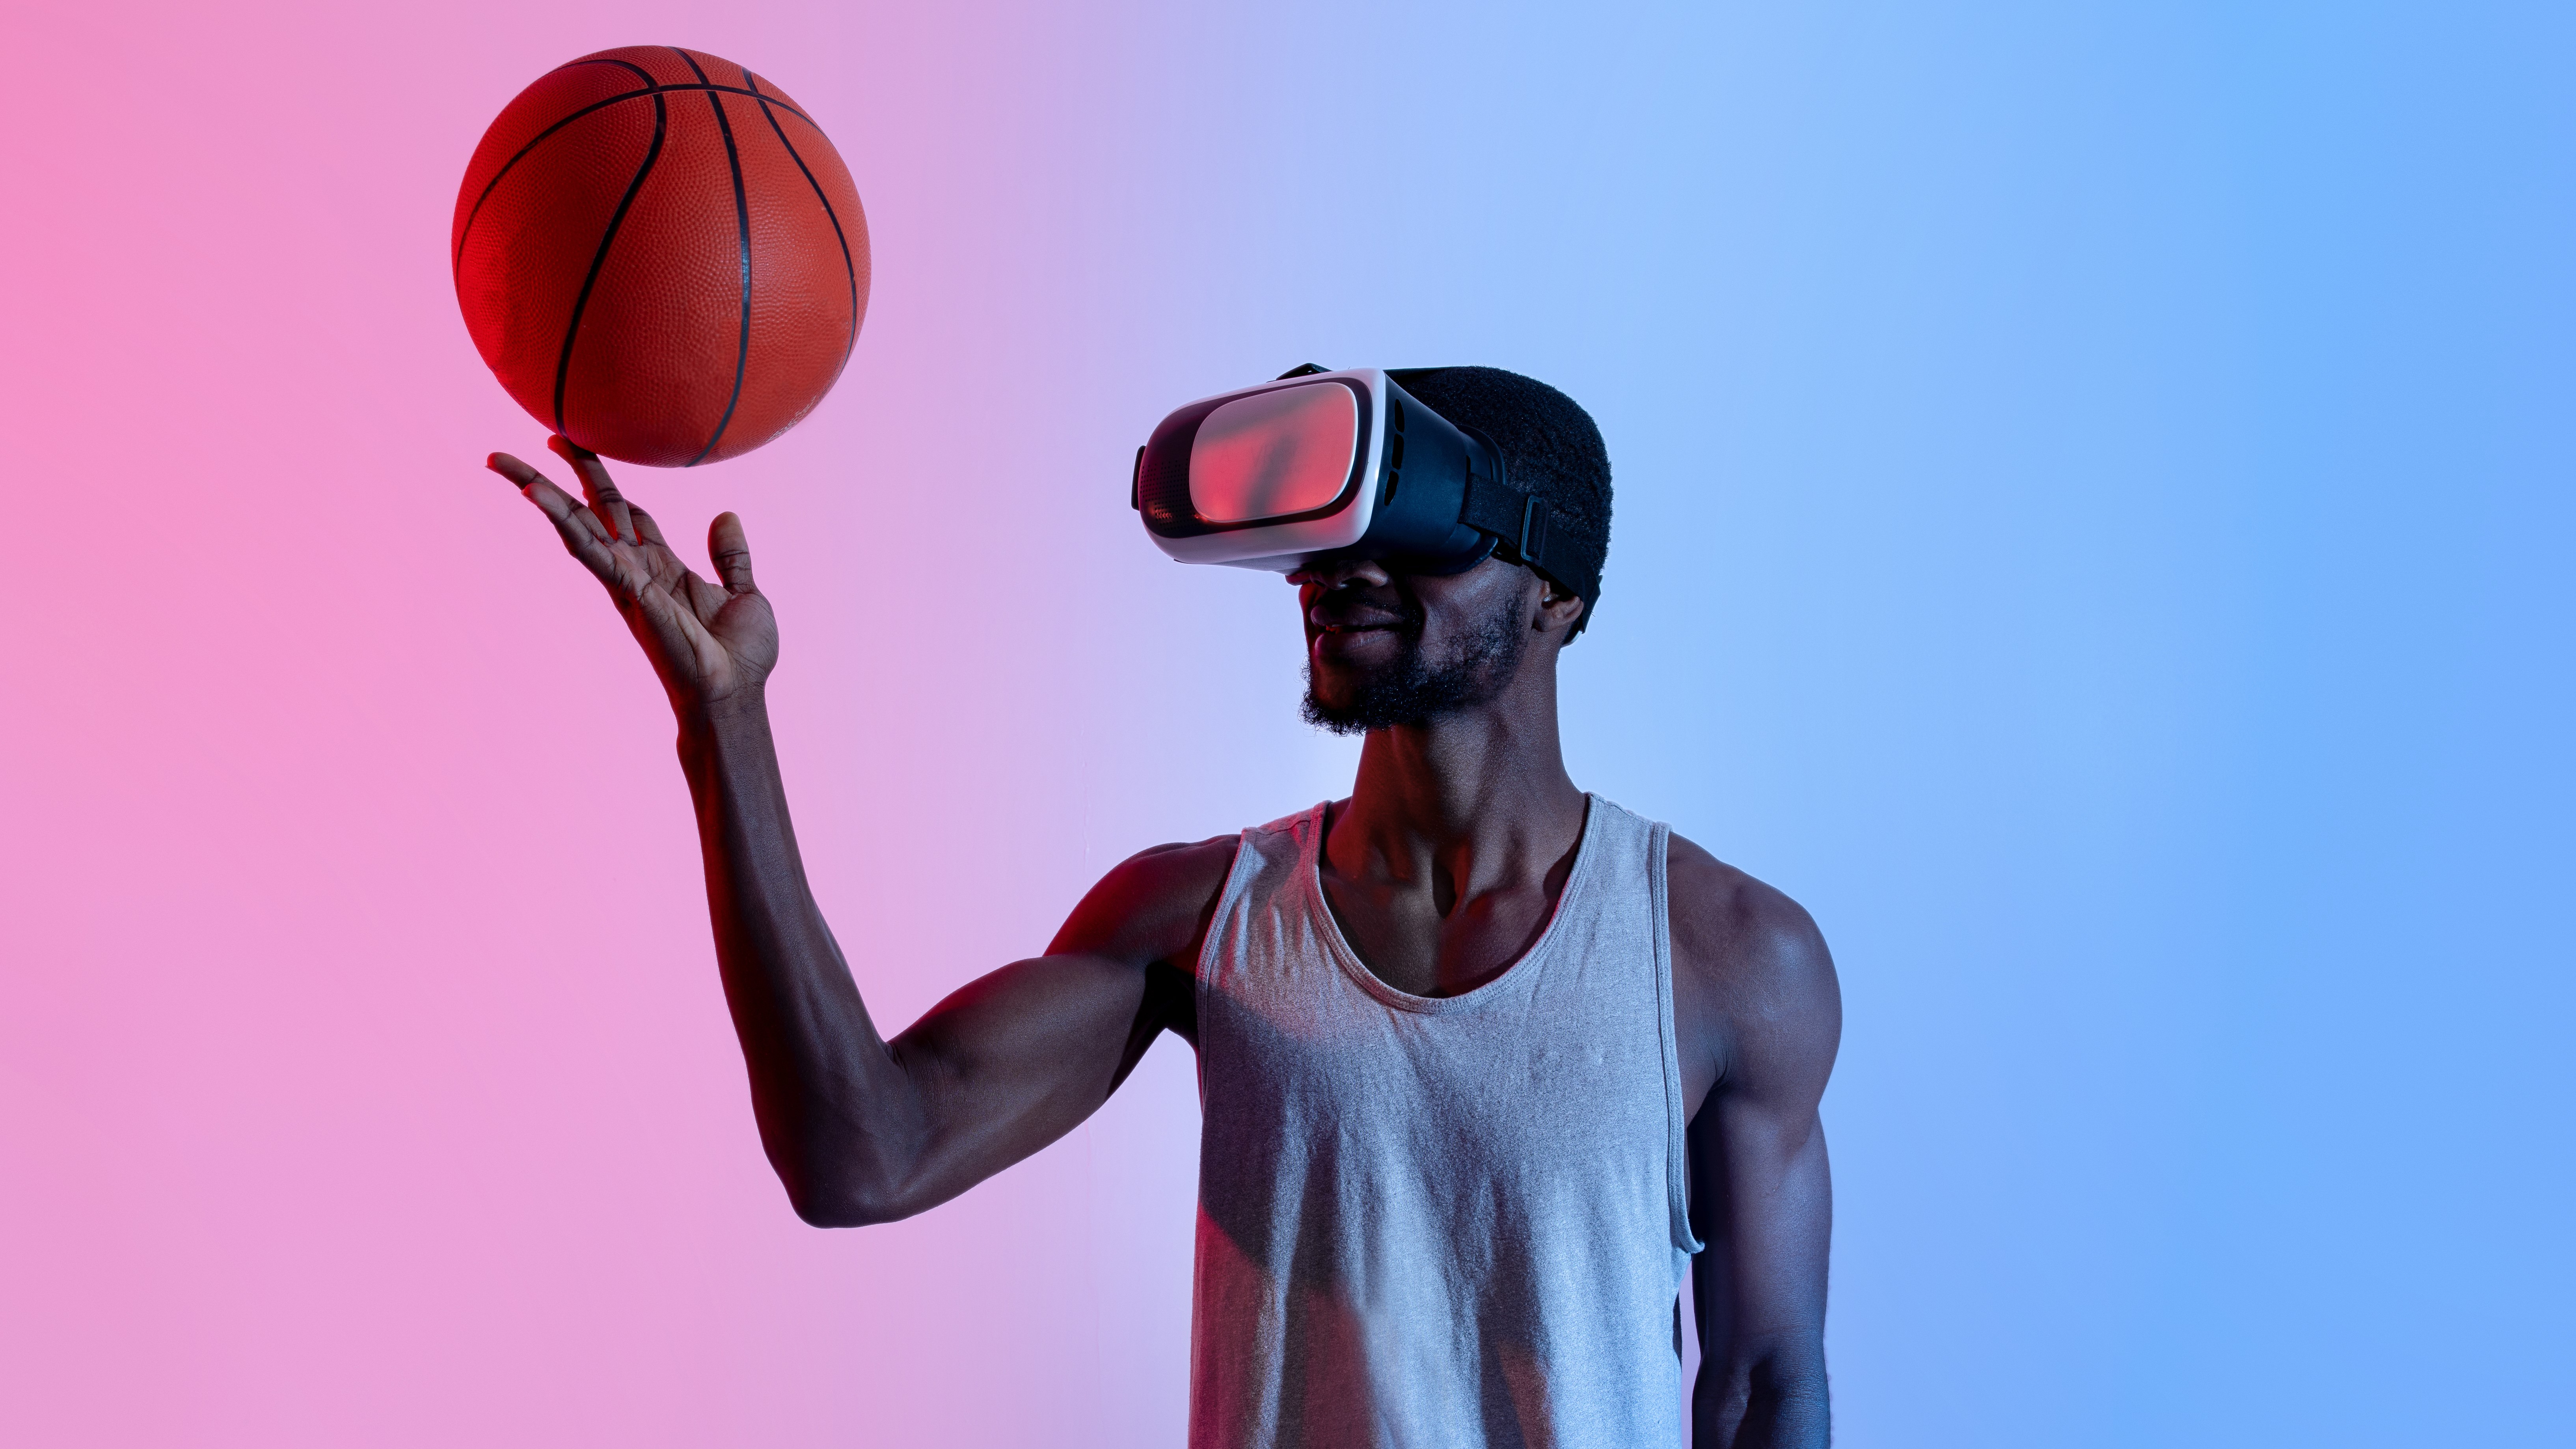 Oculus Quest 2 owners can watch over 50 live NBA games for free TechRadar